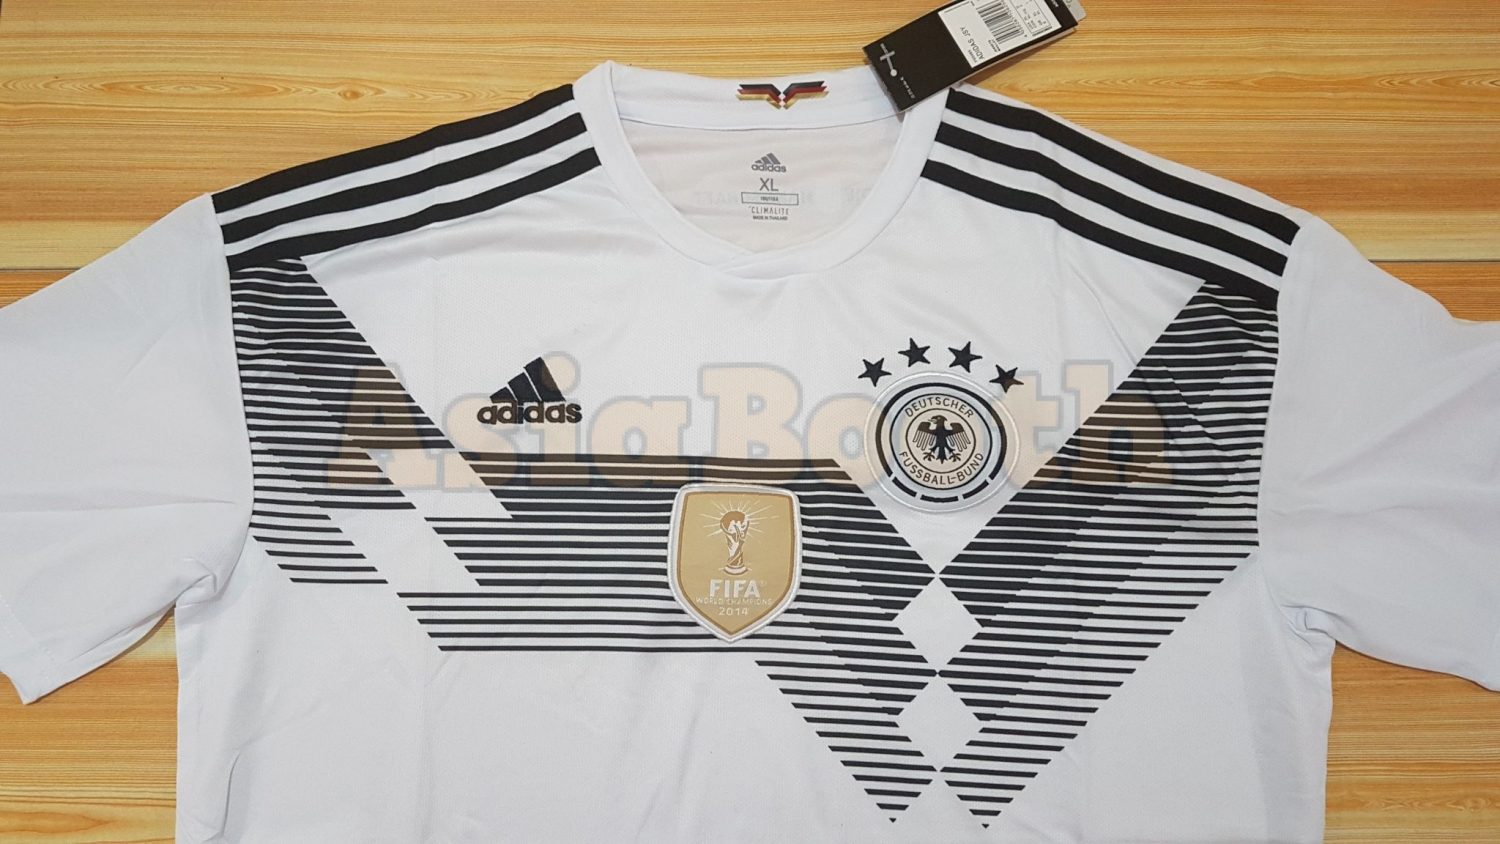 2018 FIFA World Cup Jersey - Germany 